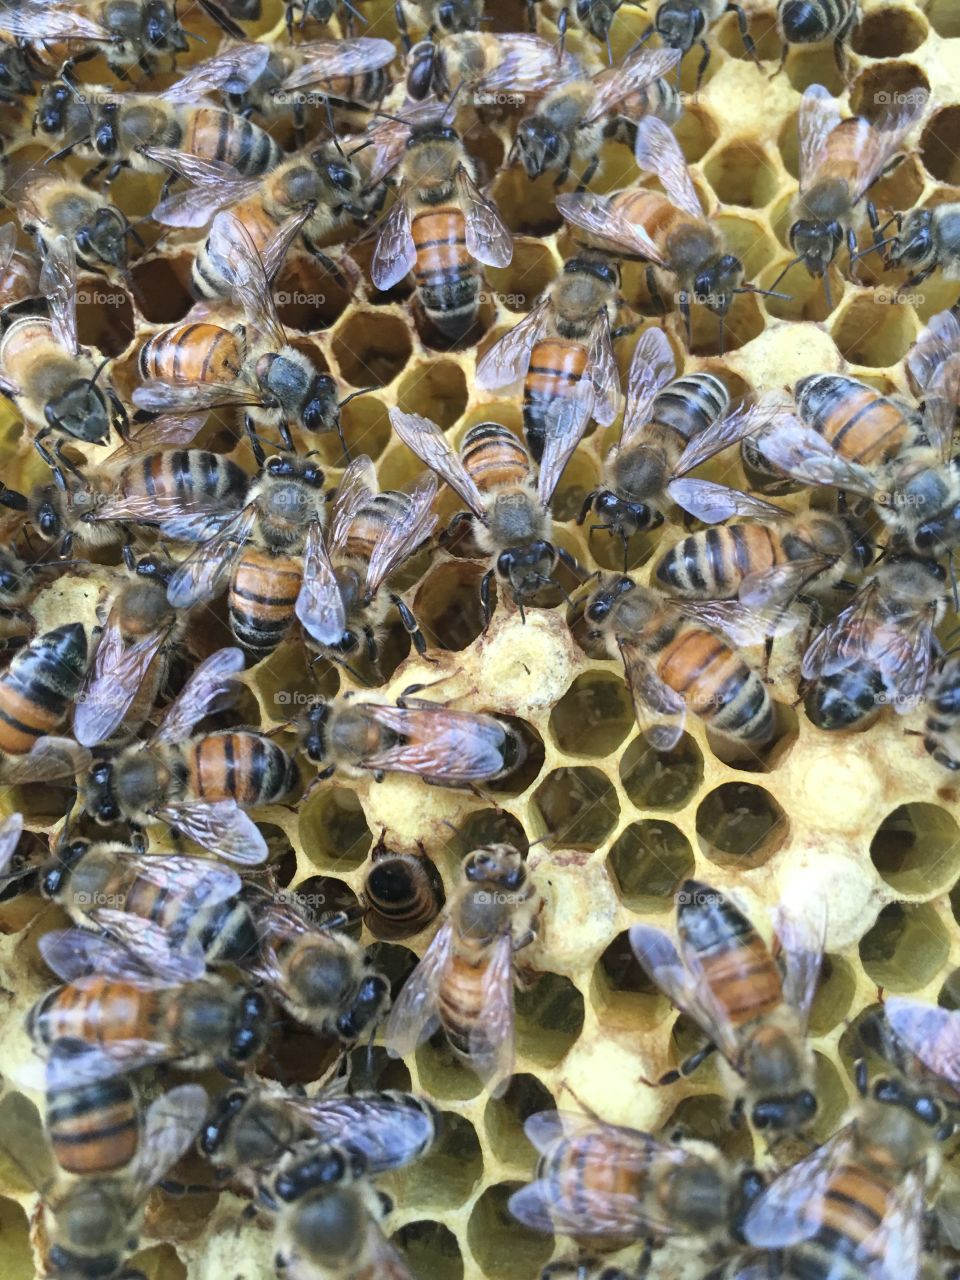 Bees in comb